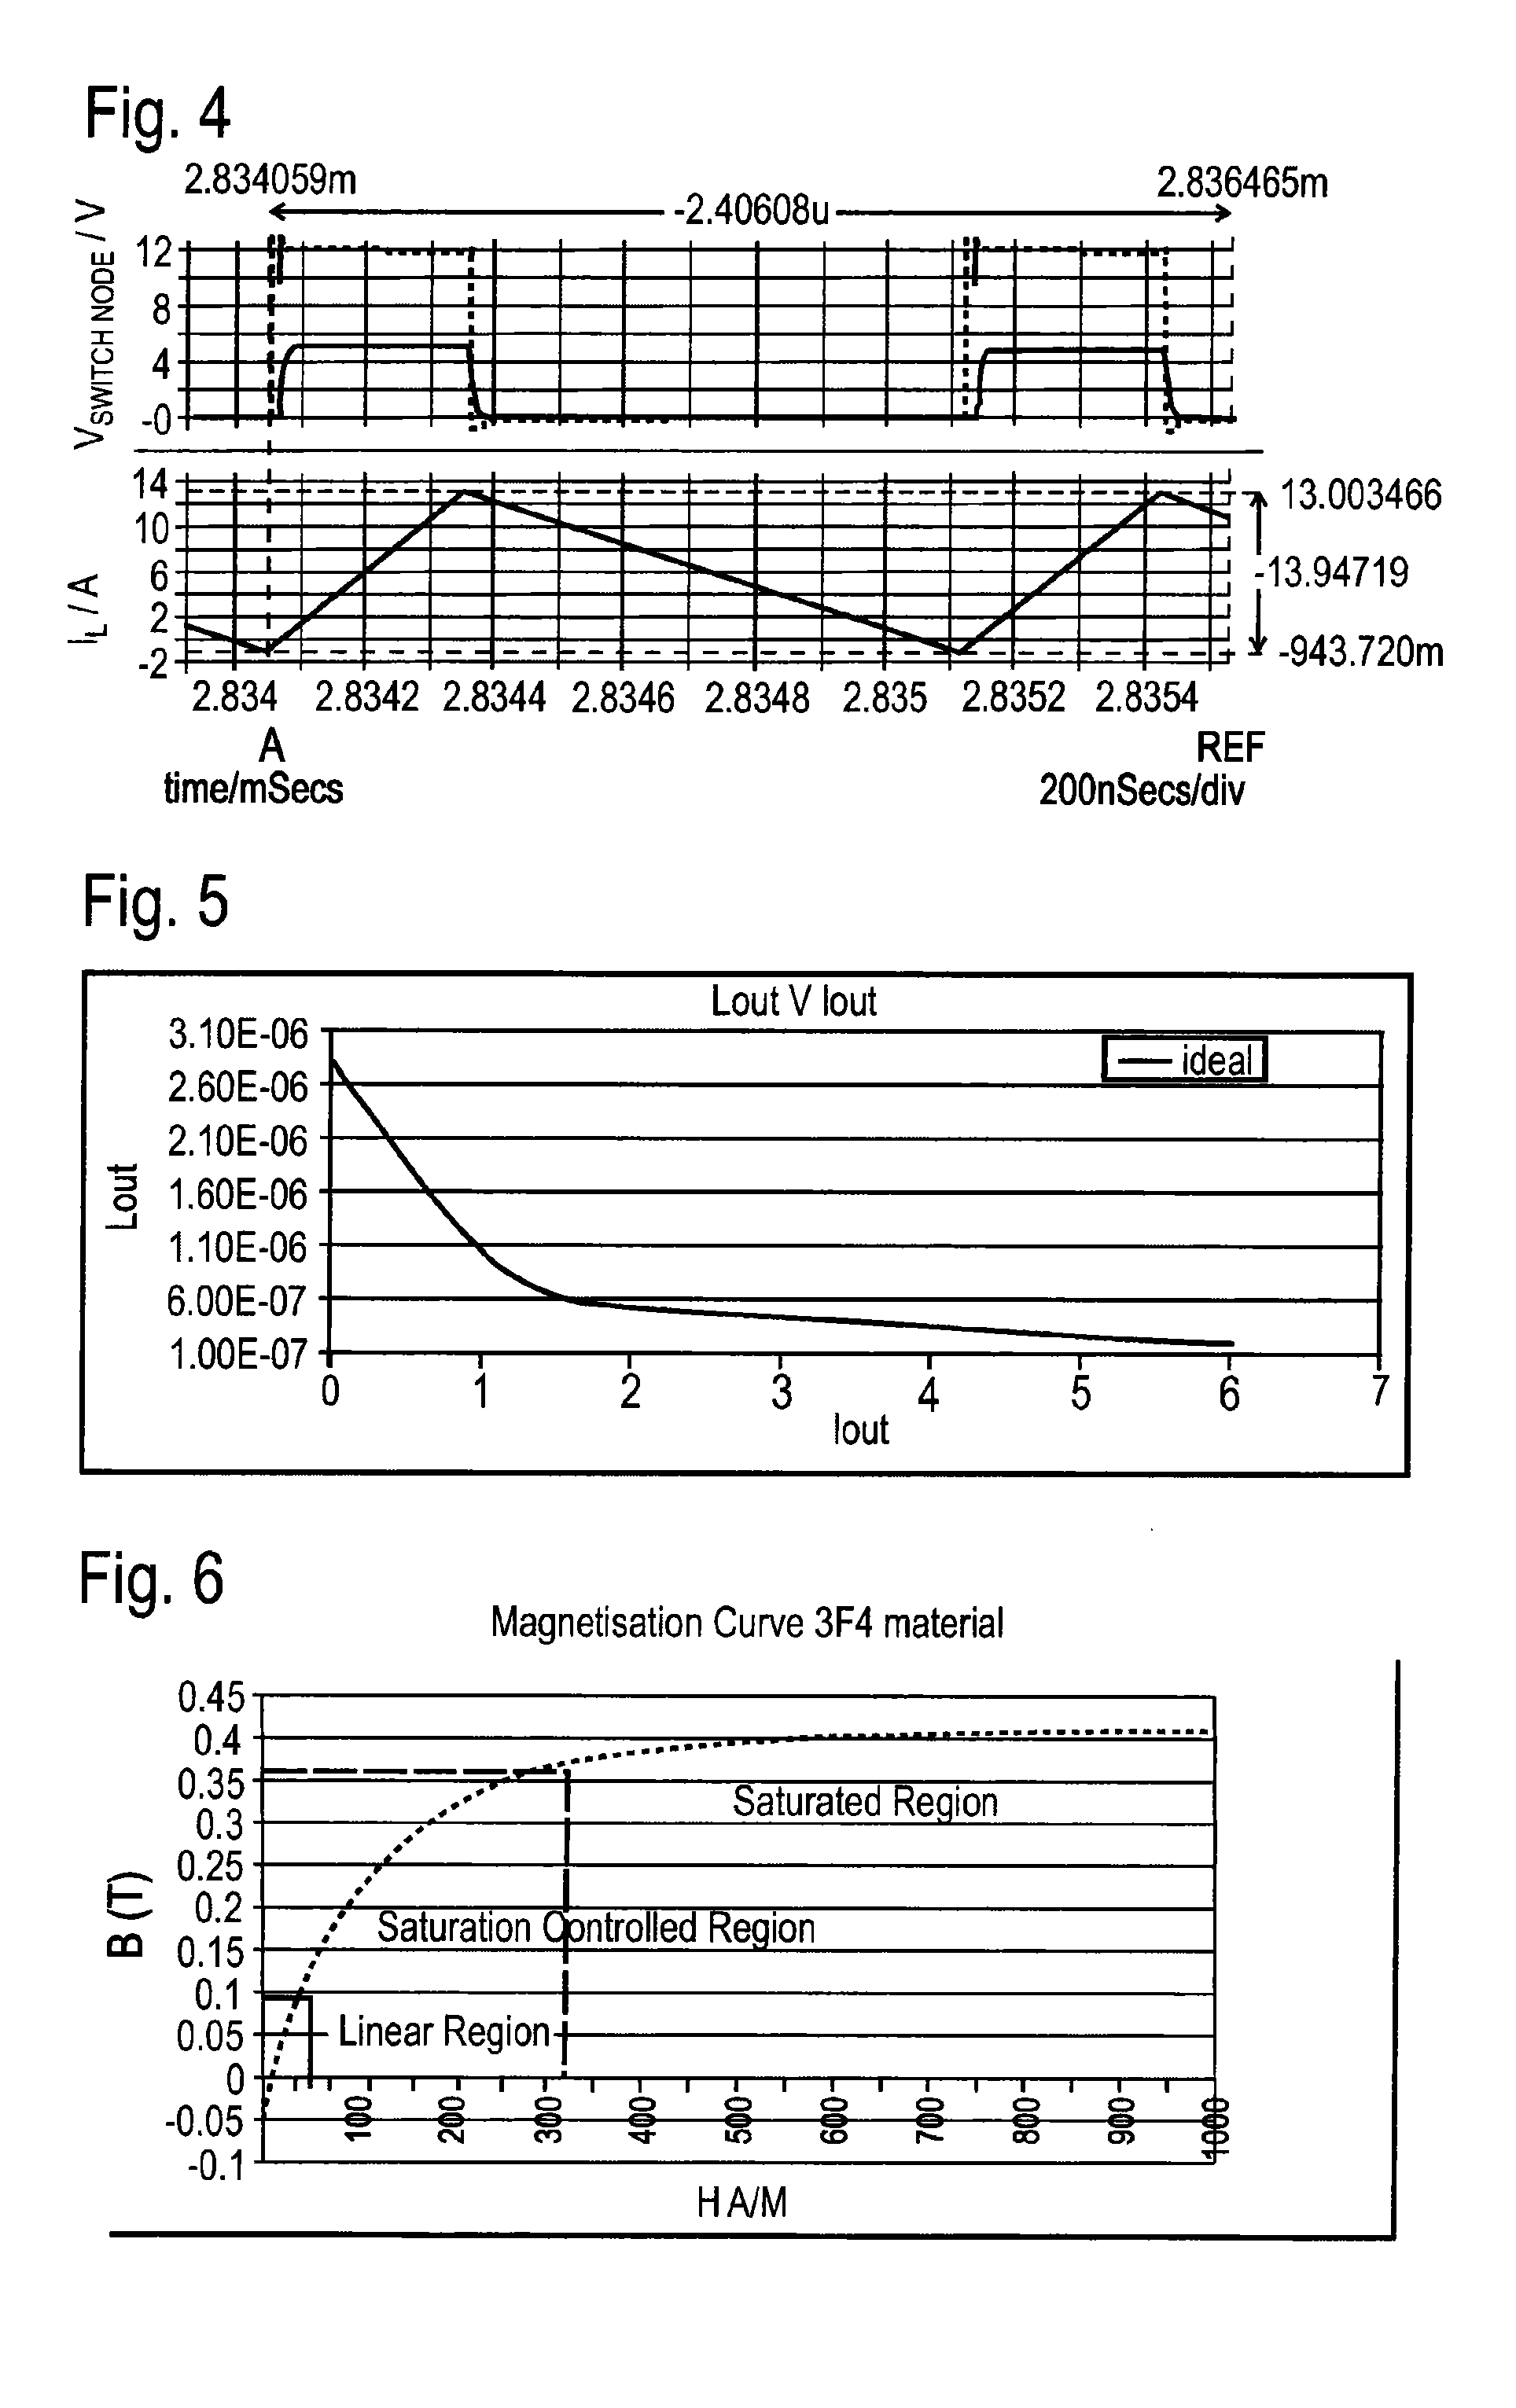 Buck converter with a stabilized switching frequency